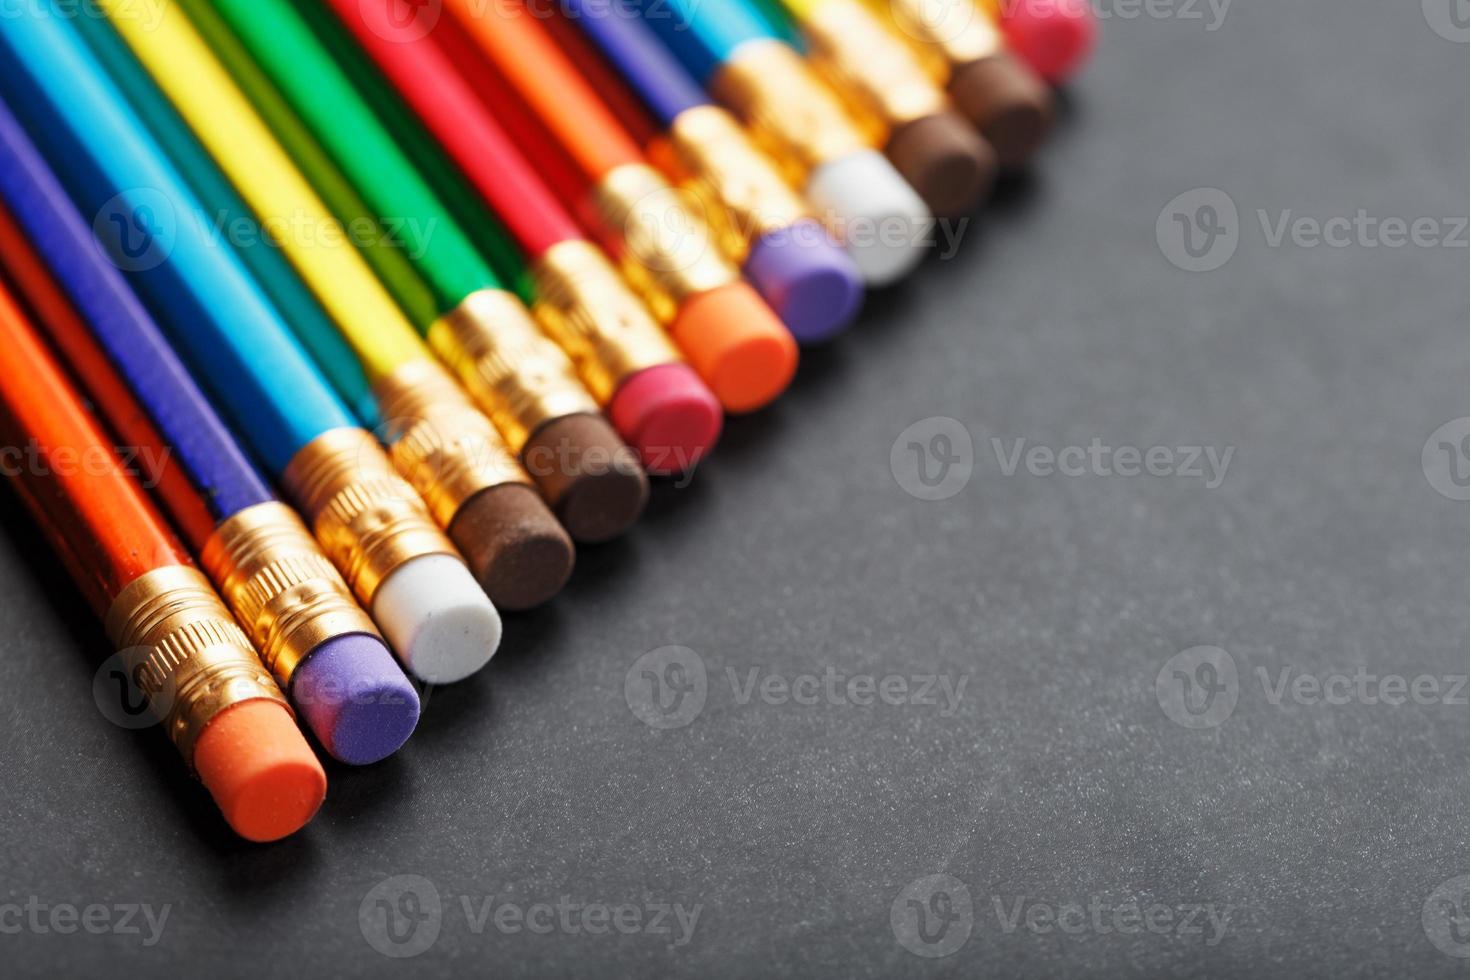 Colorful pencils with erasers in a row on a black background photo